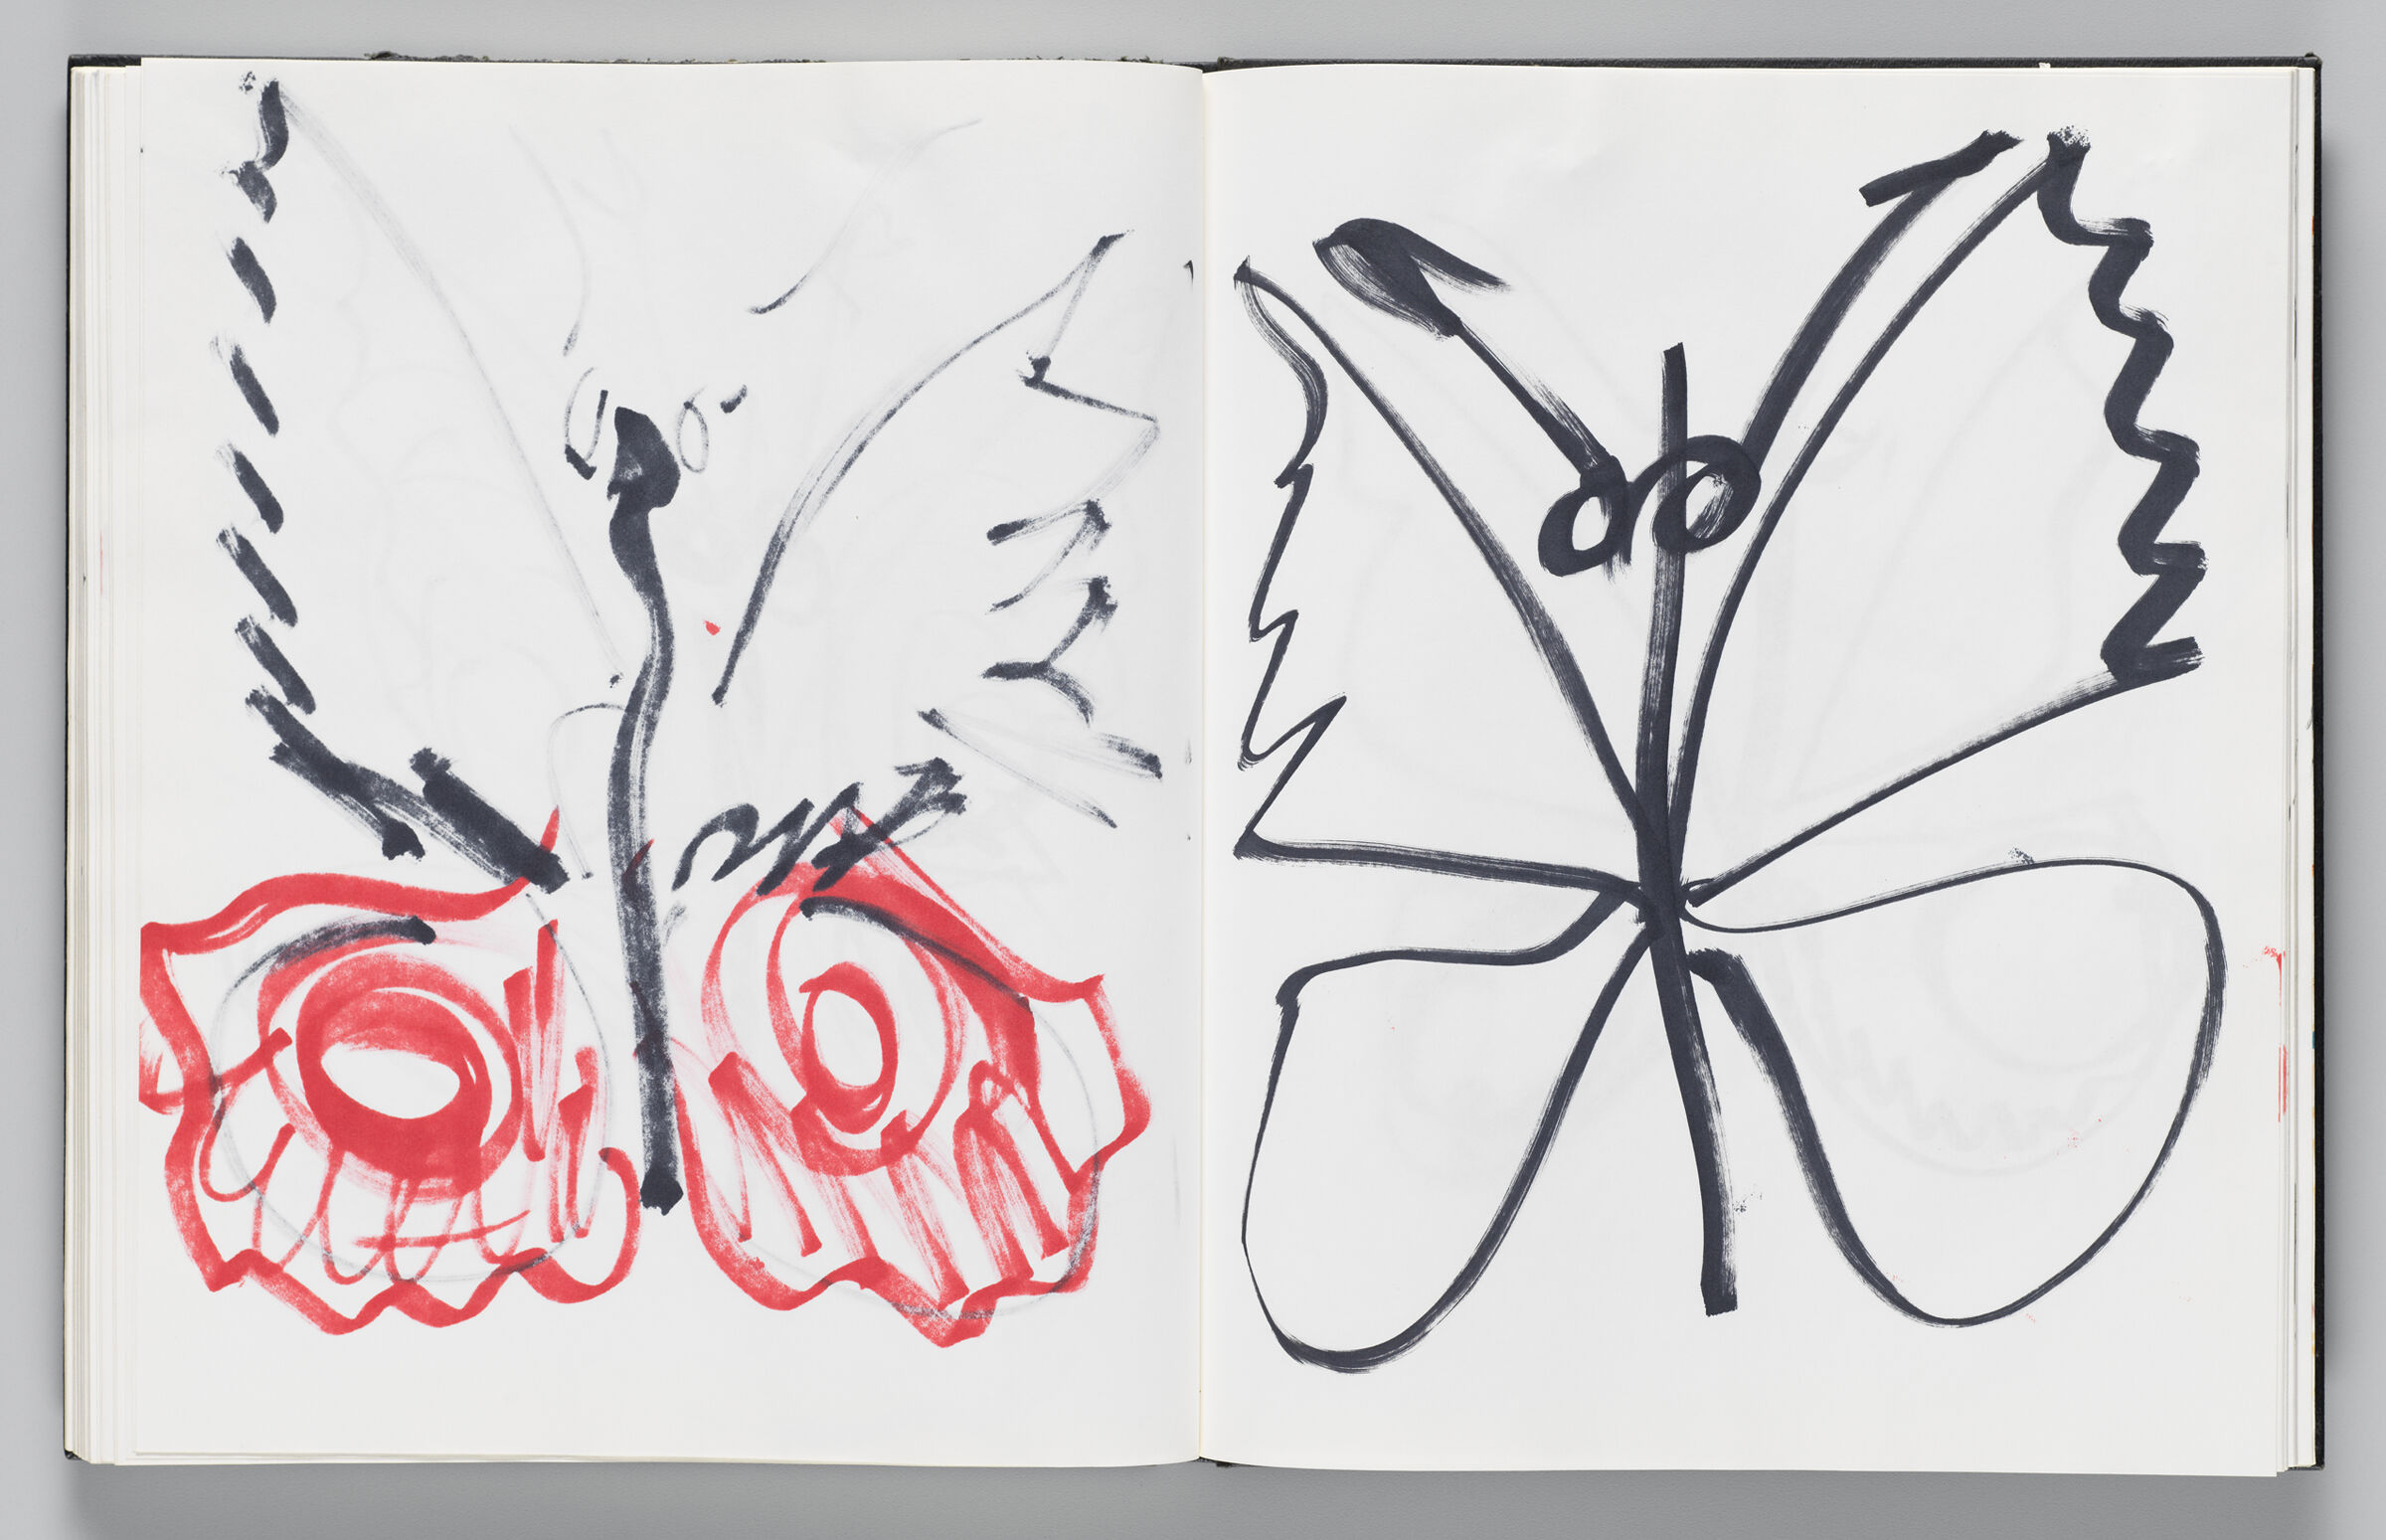 Untitled (Bleed-Through Of Previous Page, Left Page); Untitled (Winged Insect With Faint Color Transfer, Right Page)